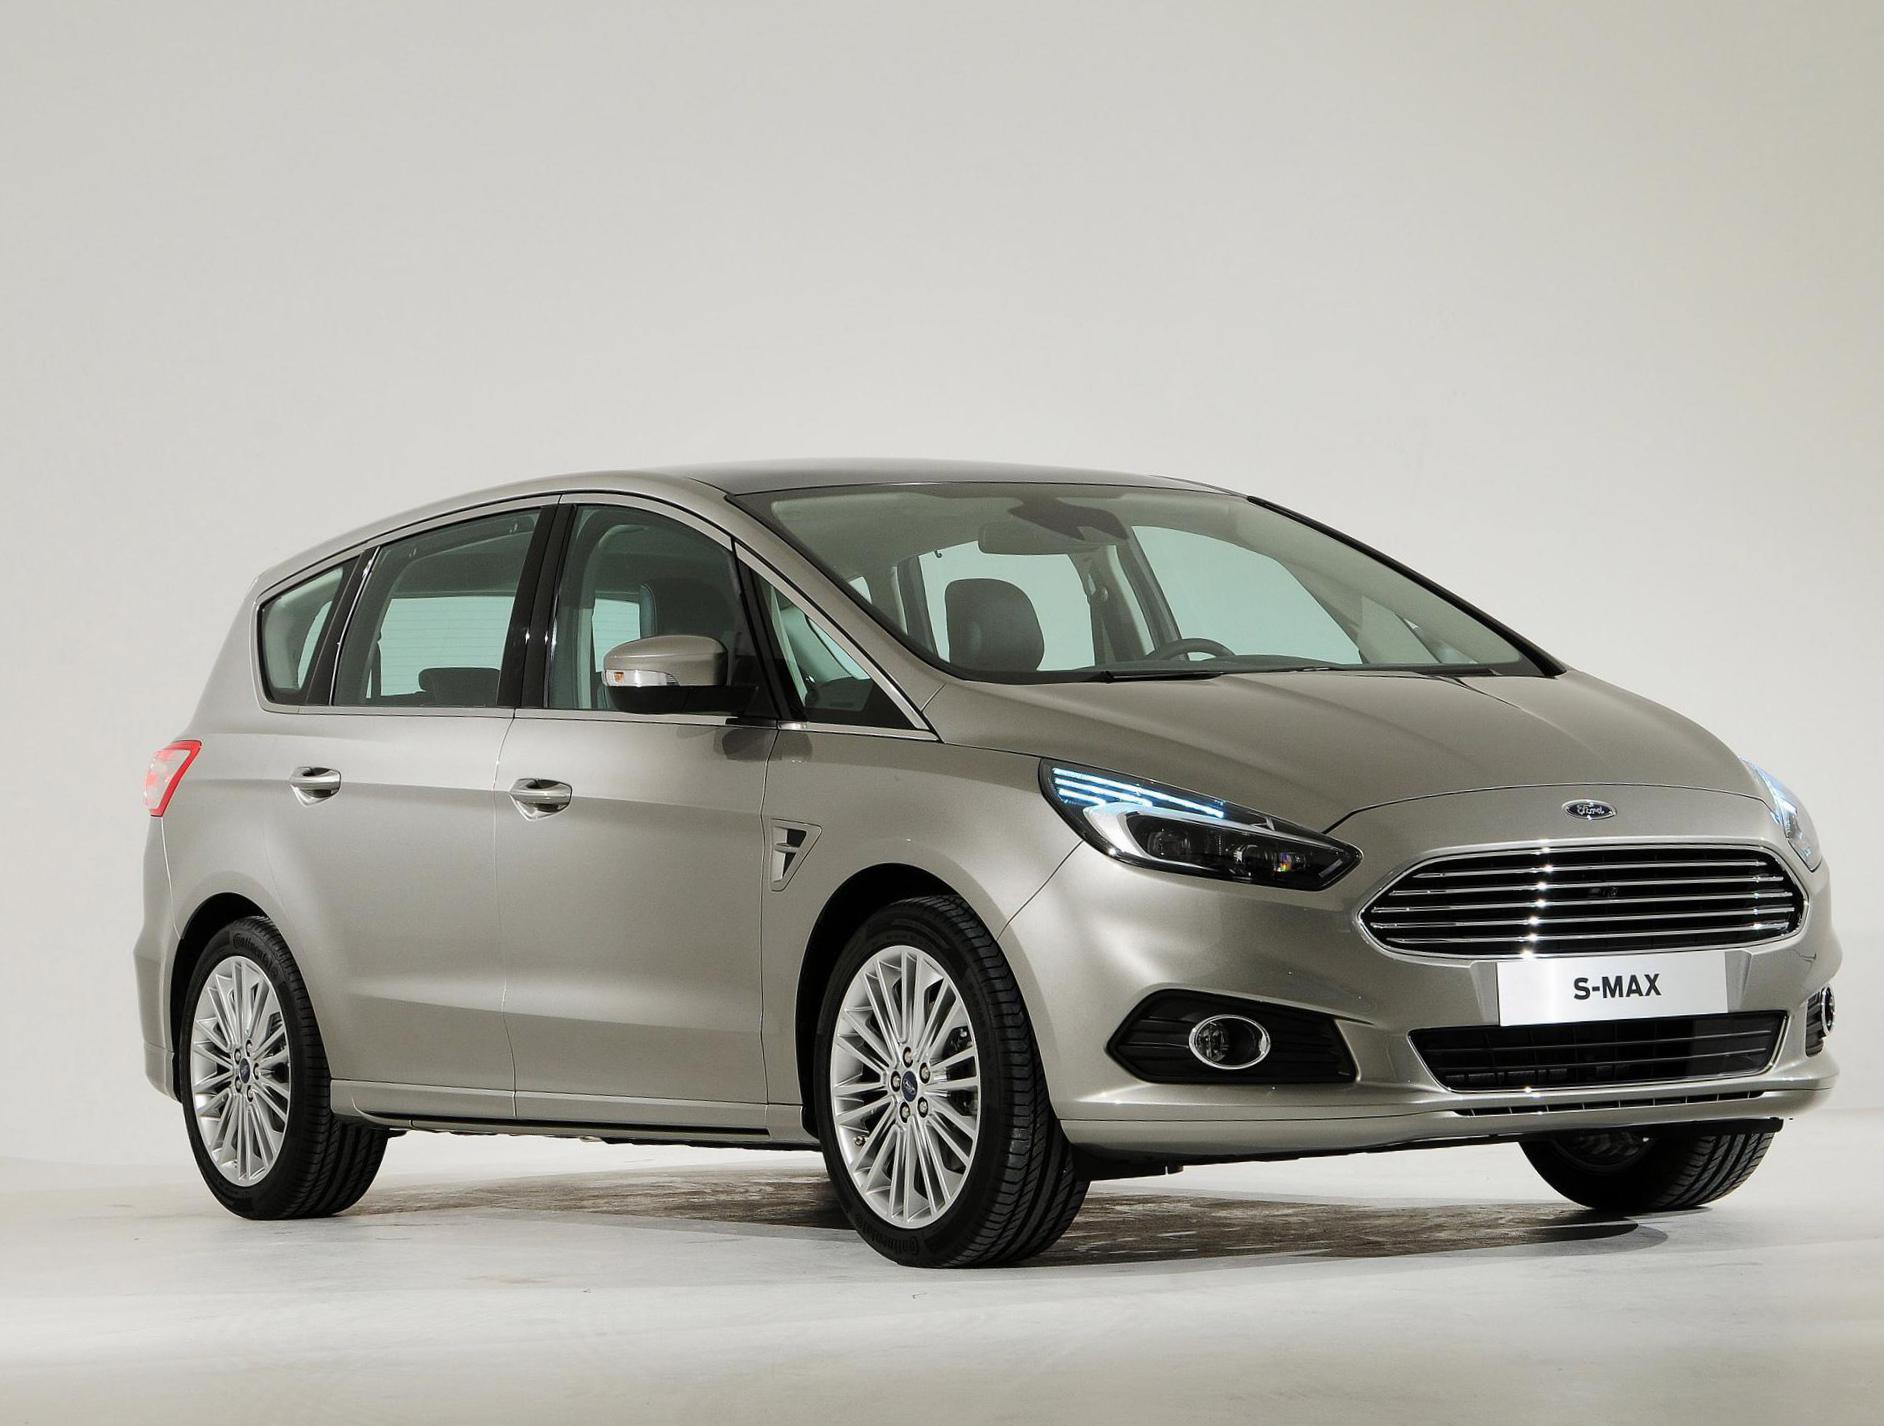 Ford S-Max how mach 2012